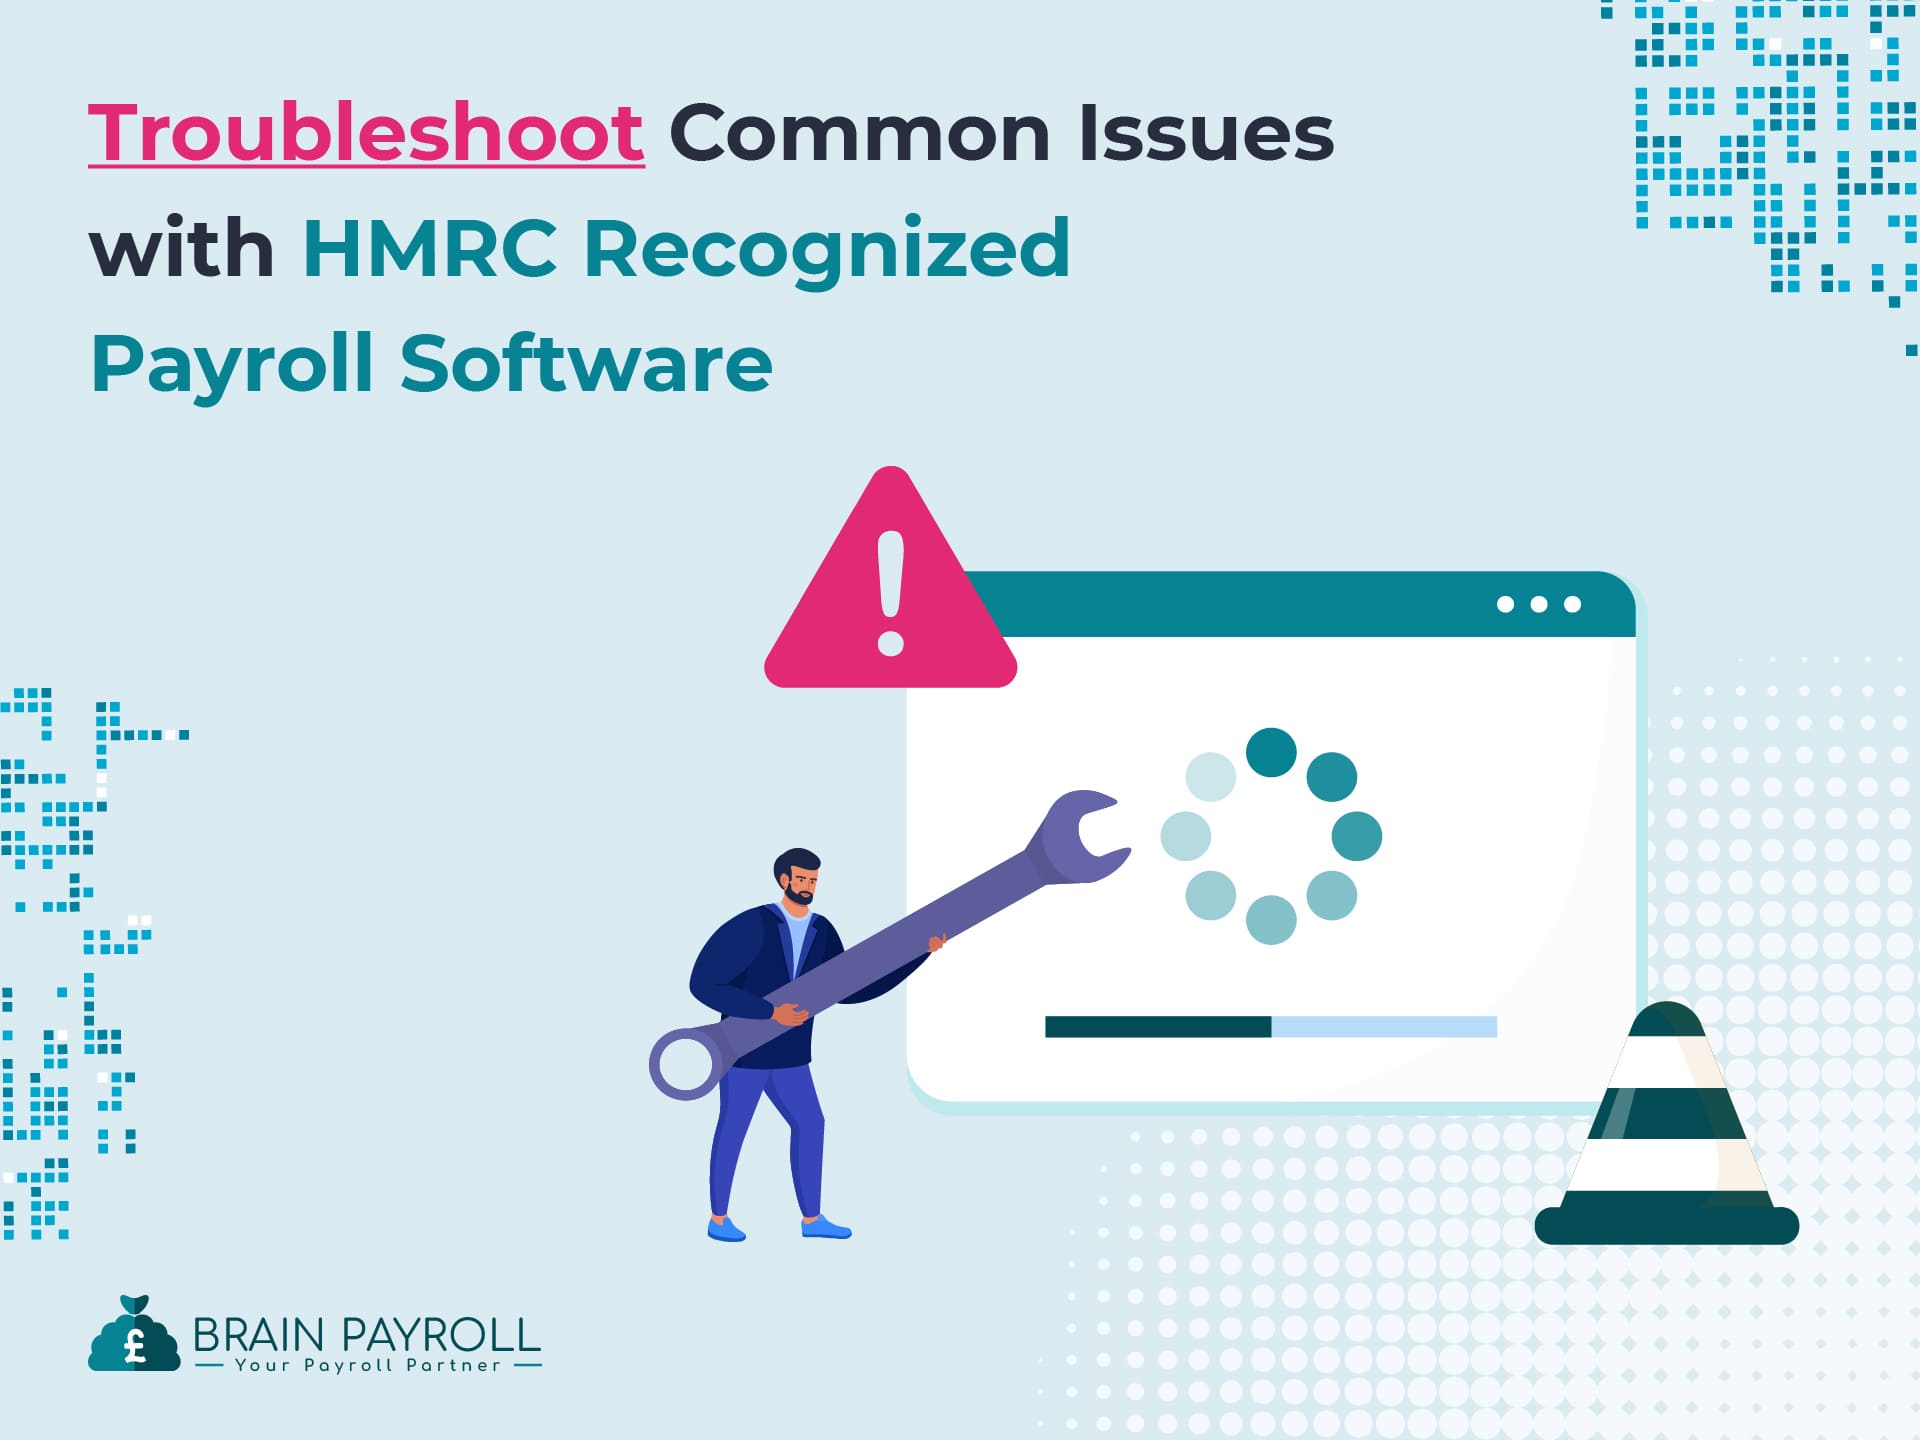 How to Troubleshoot Common Issues with HMRC Payroll Software